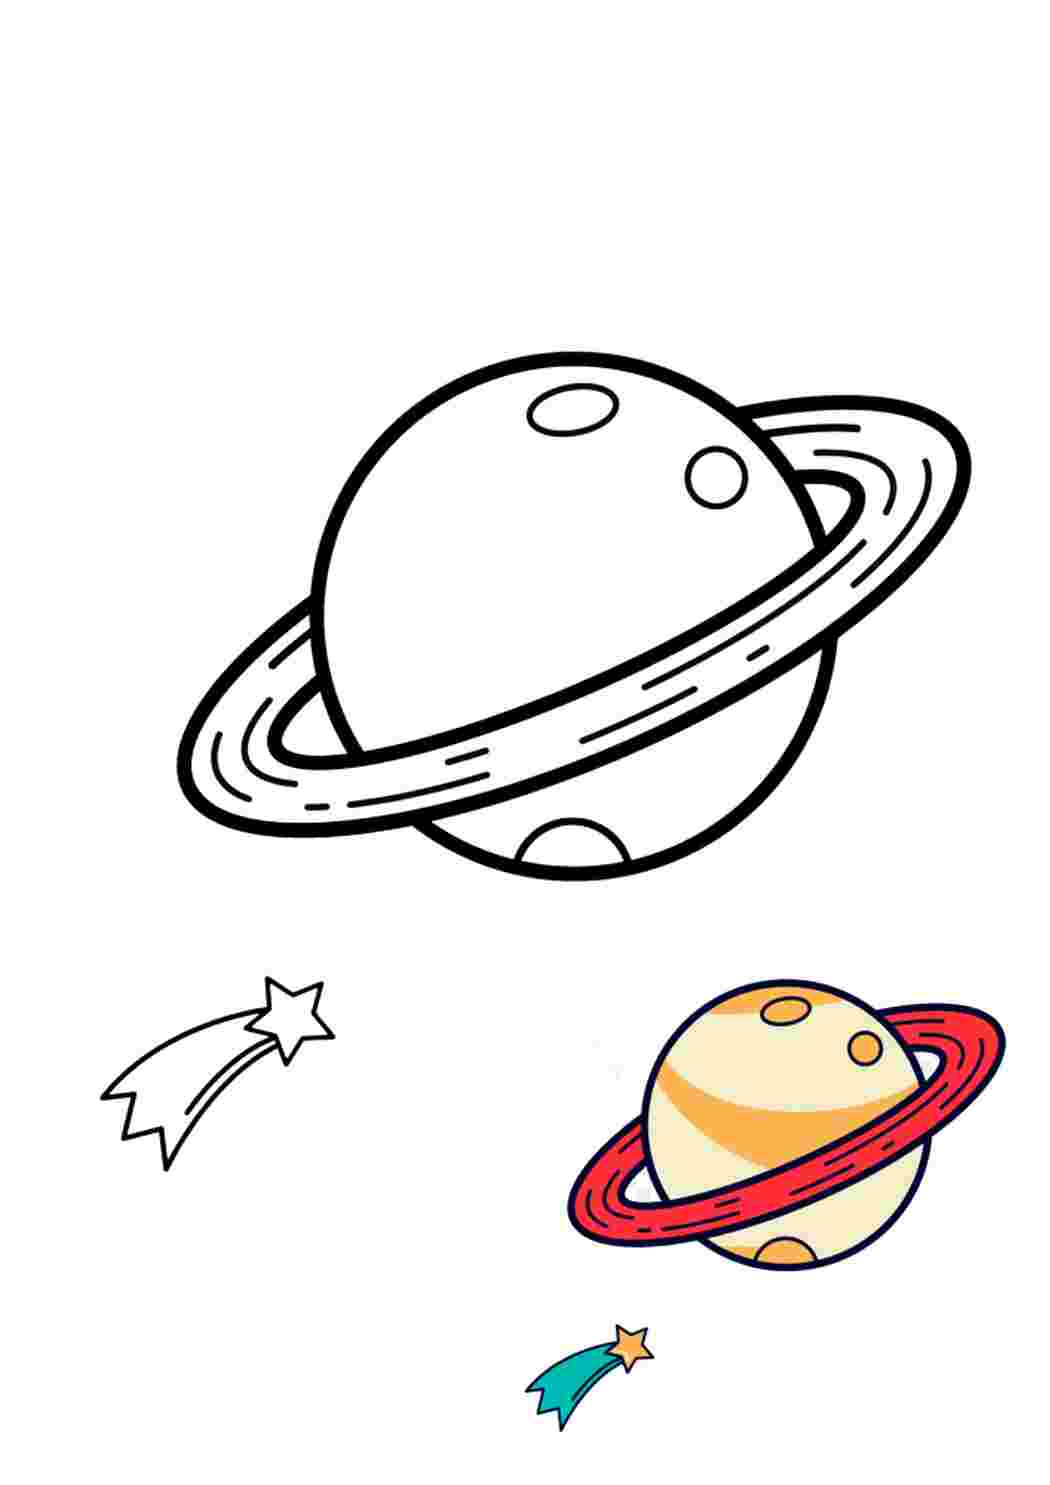 Saturn Planet coloring page | Free Printable Coloring Pages